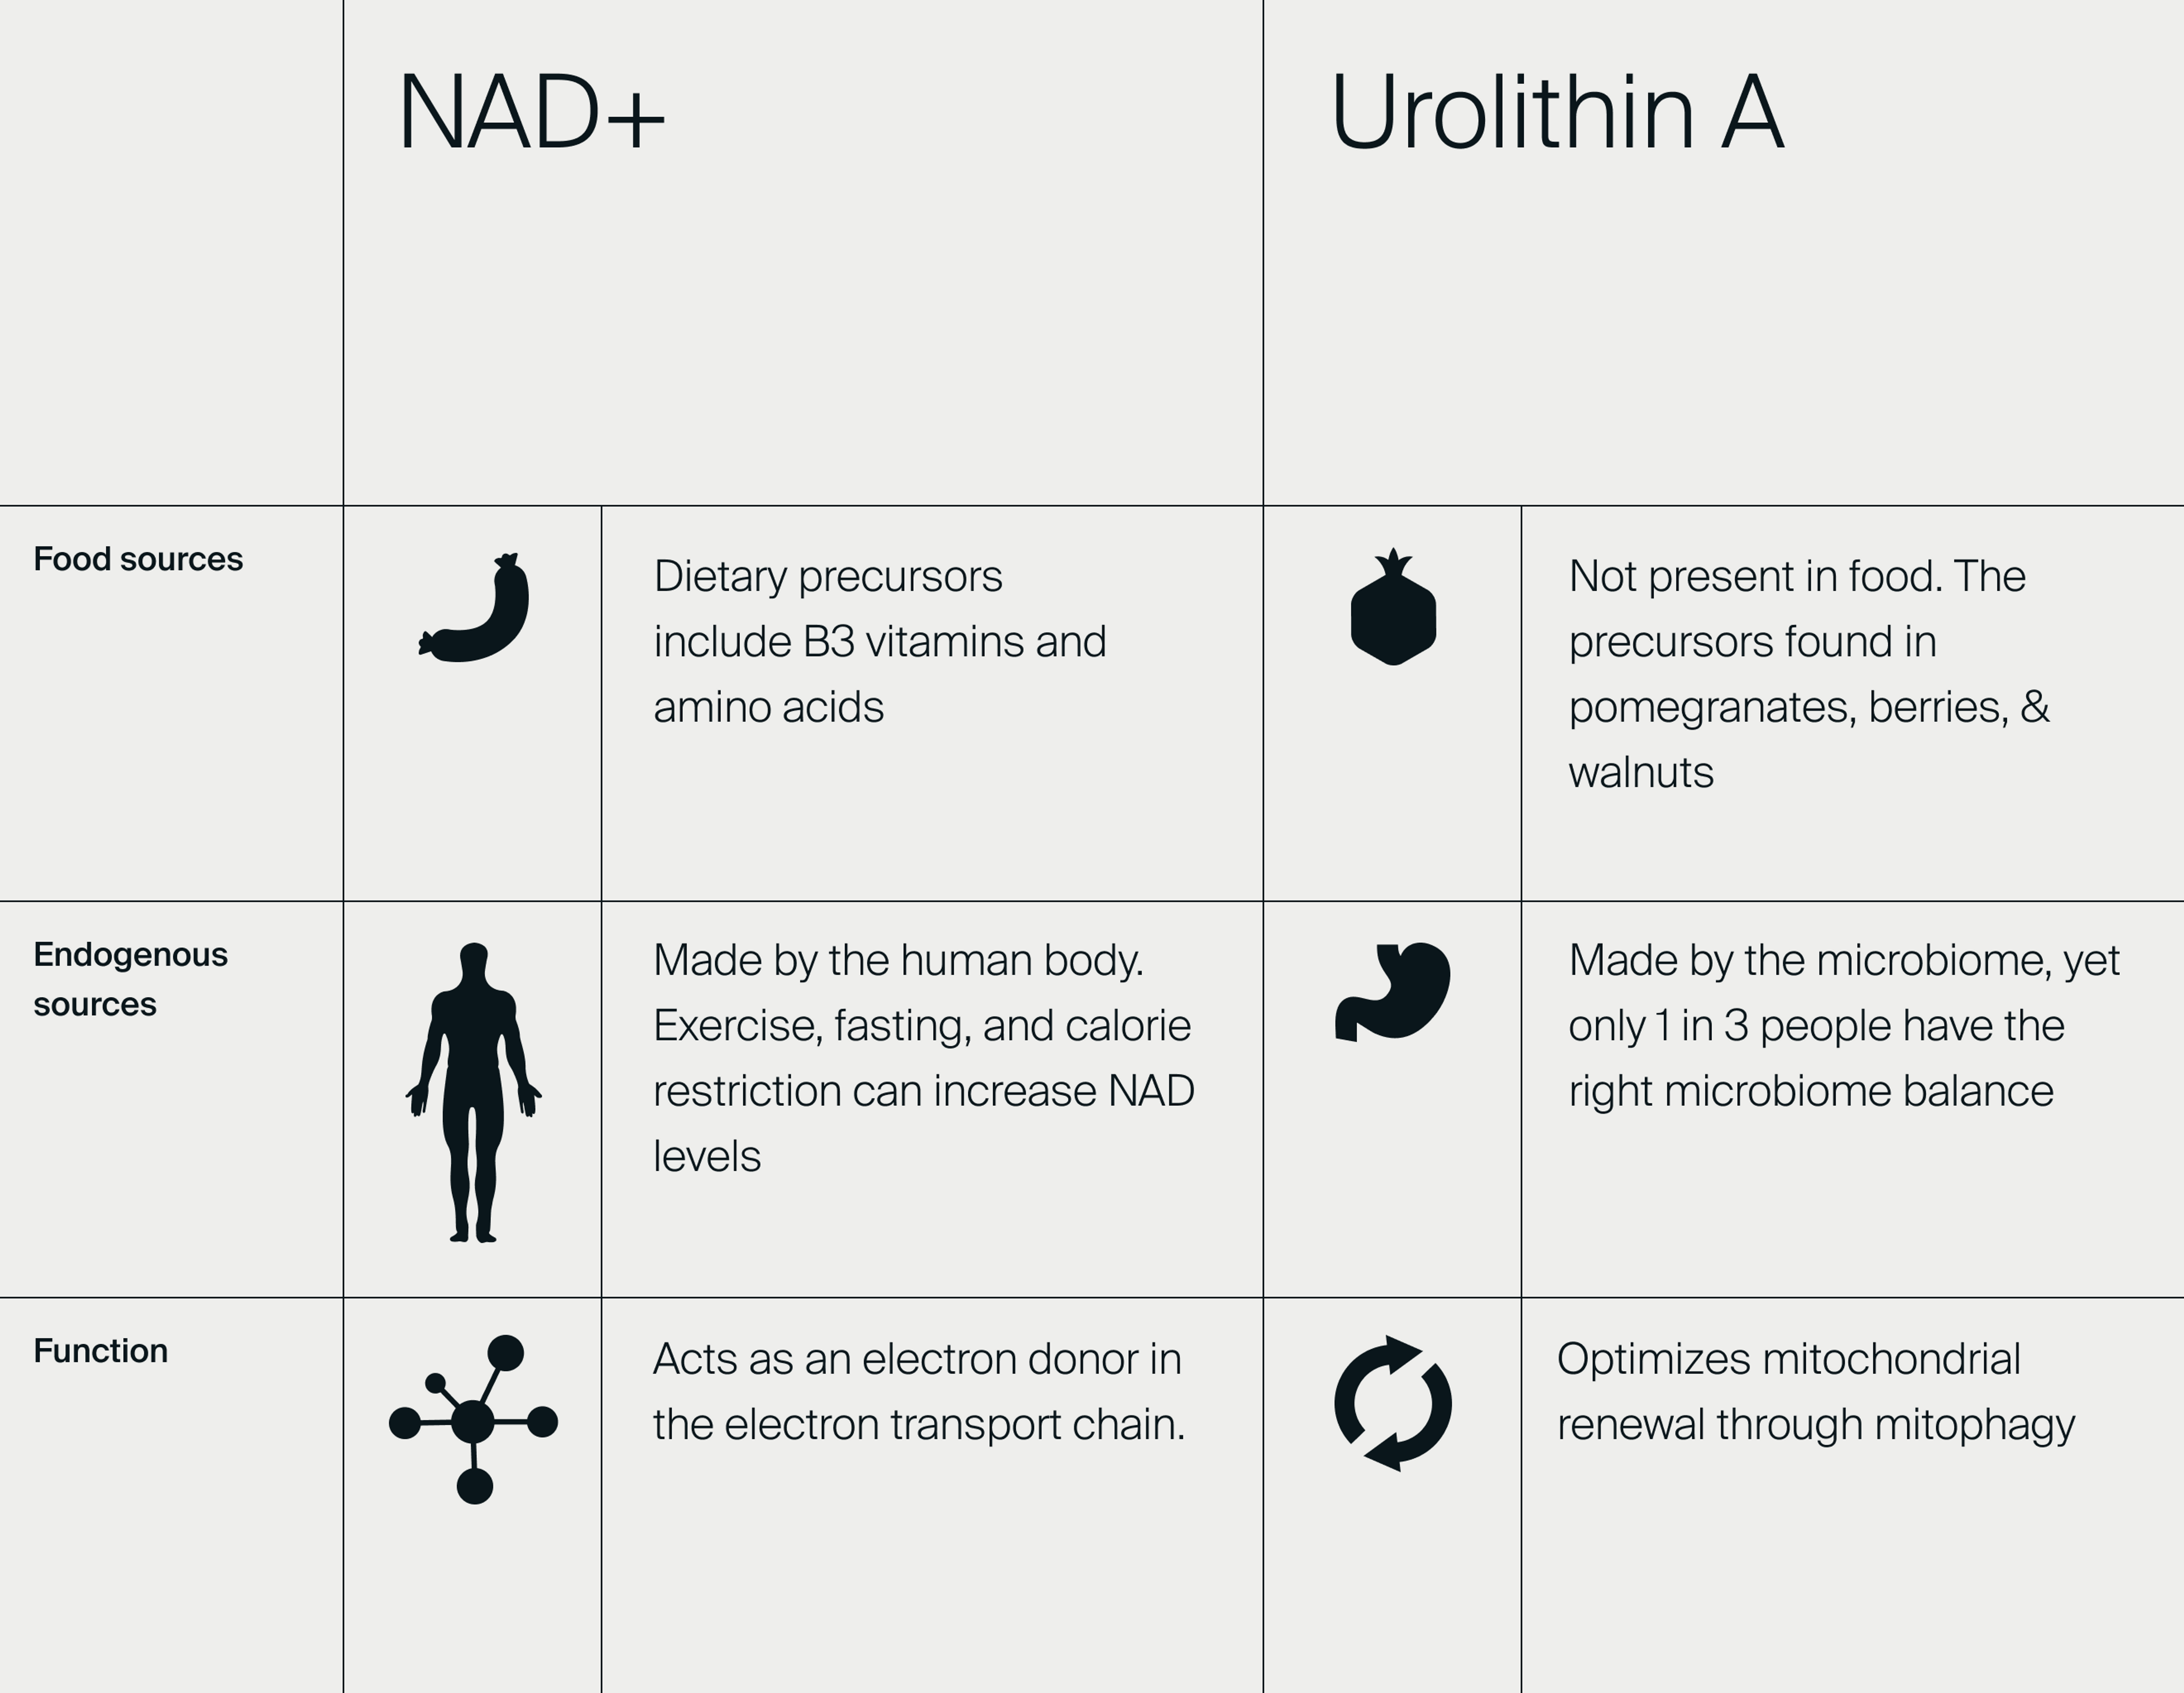 Table comparing the endogenous sources, food sources and the function of Urolithin A and NAD+